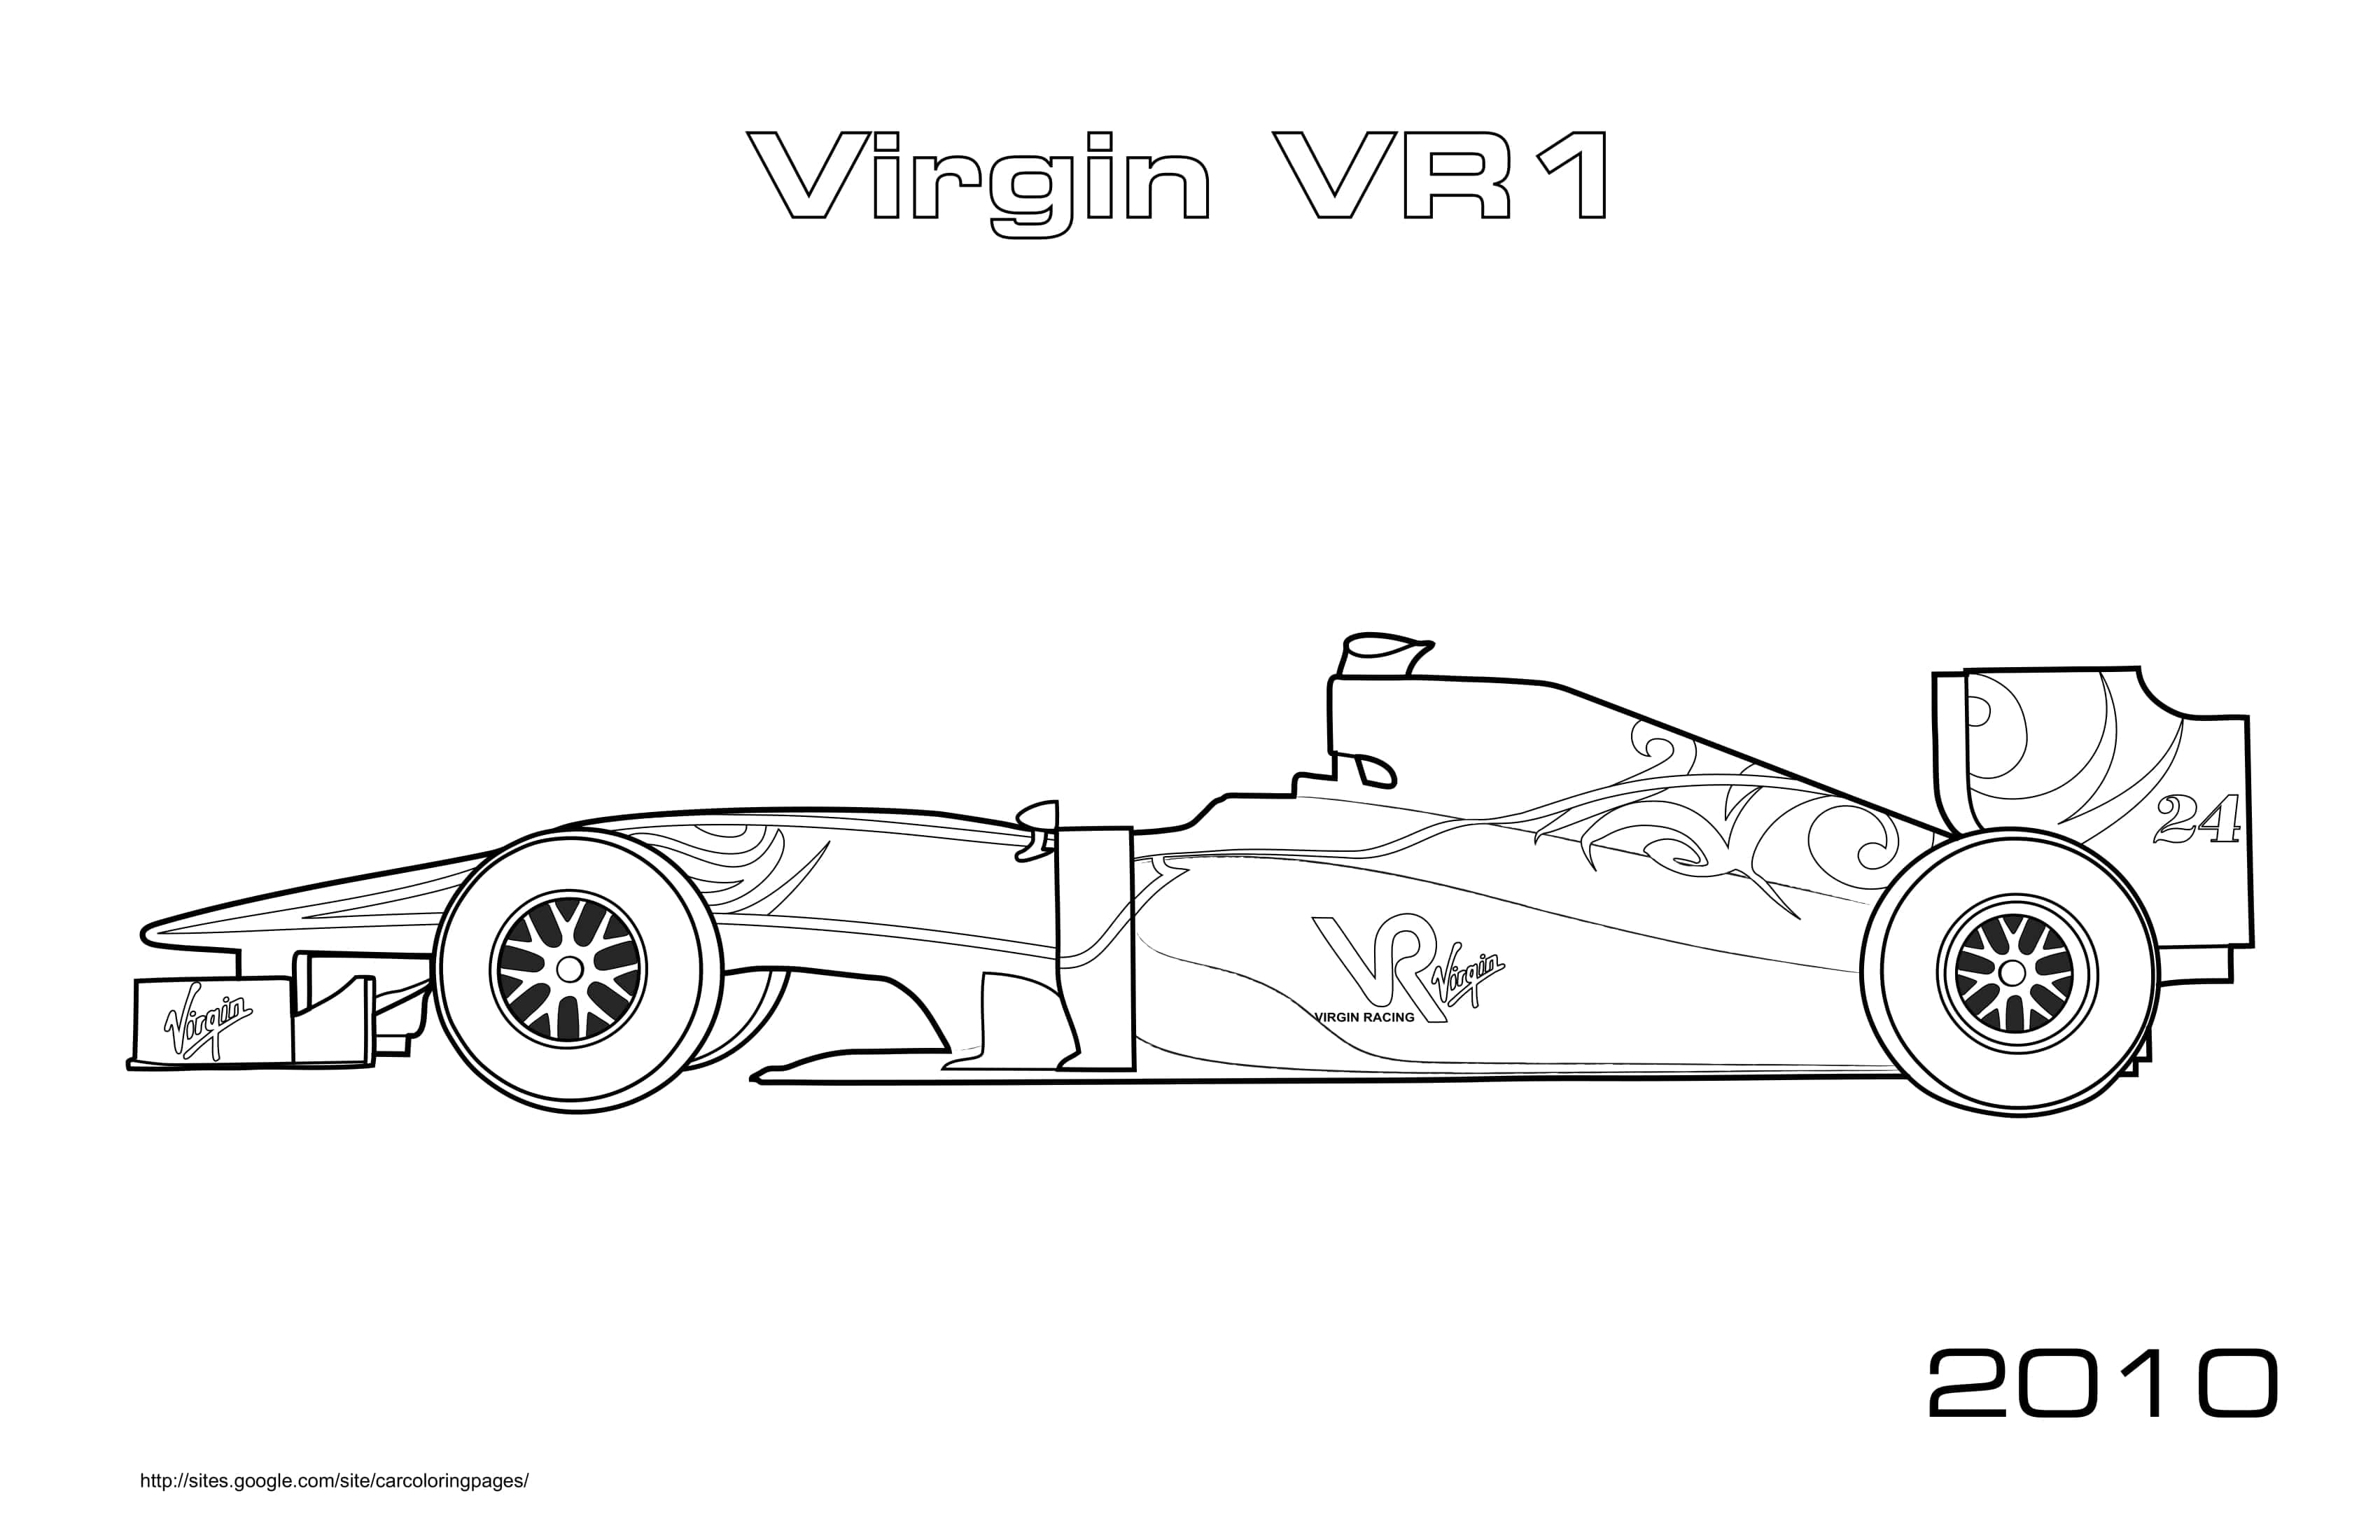 F1 Virgin Vr1 2010 Coloring Page